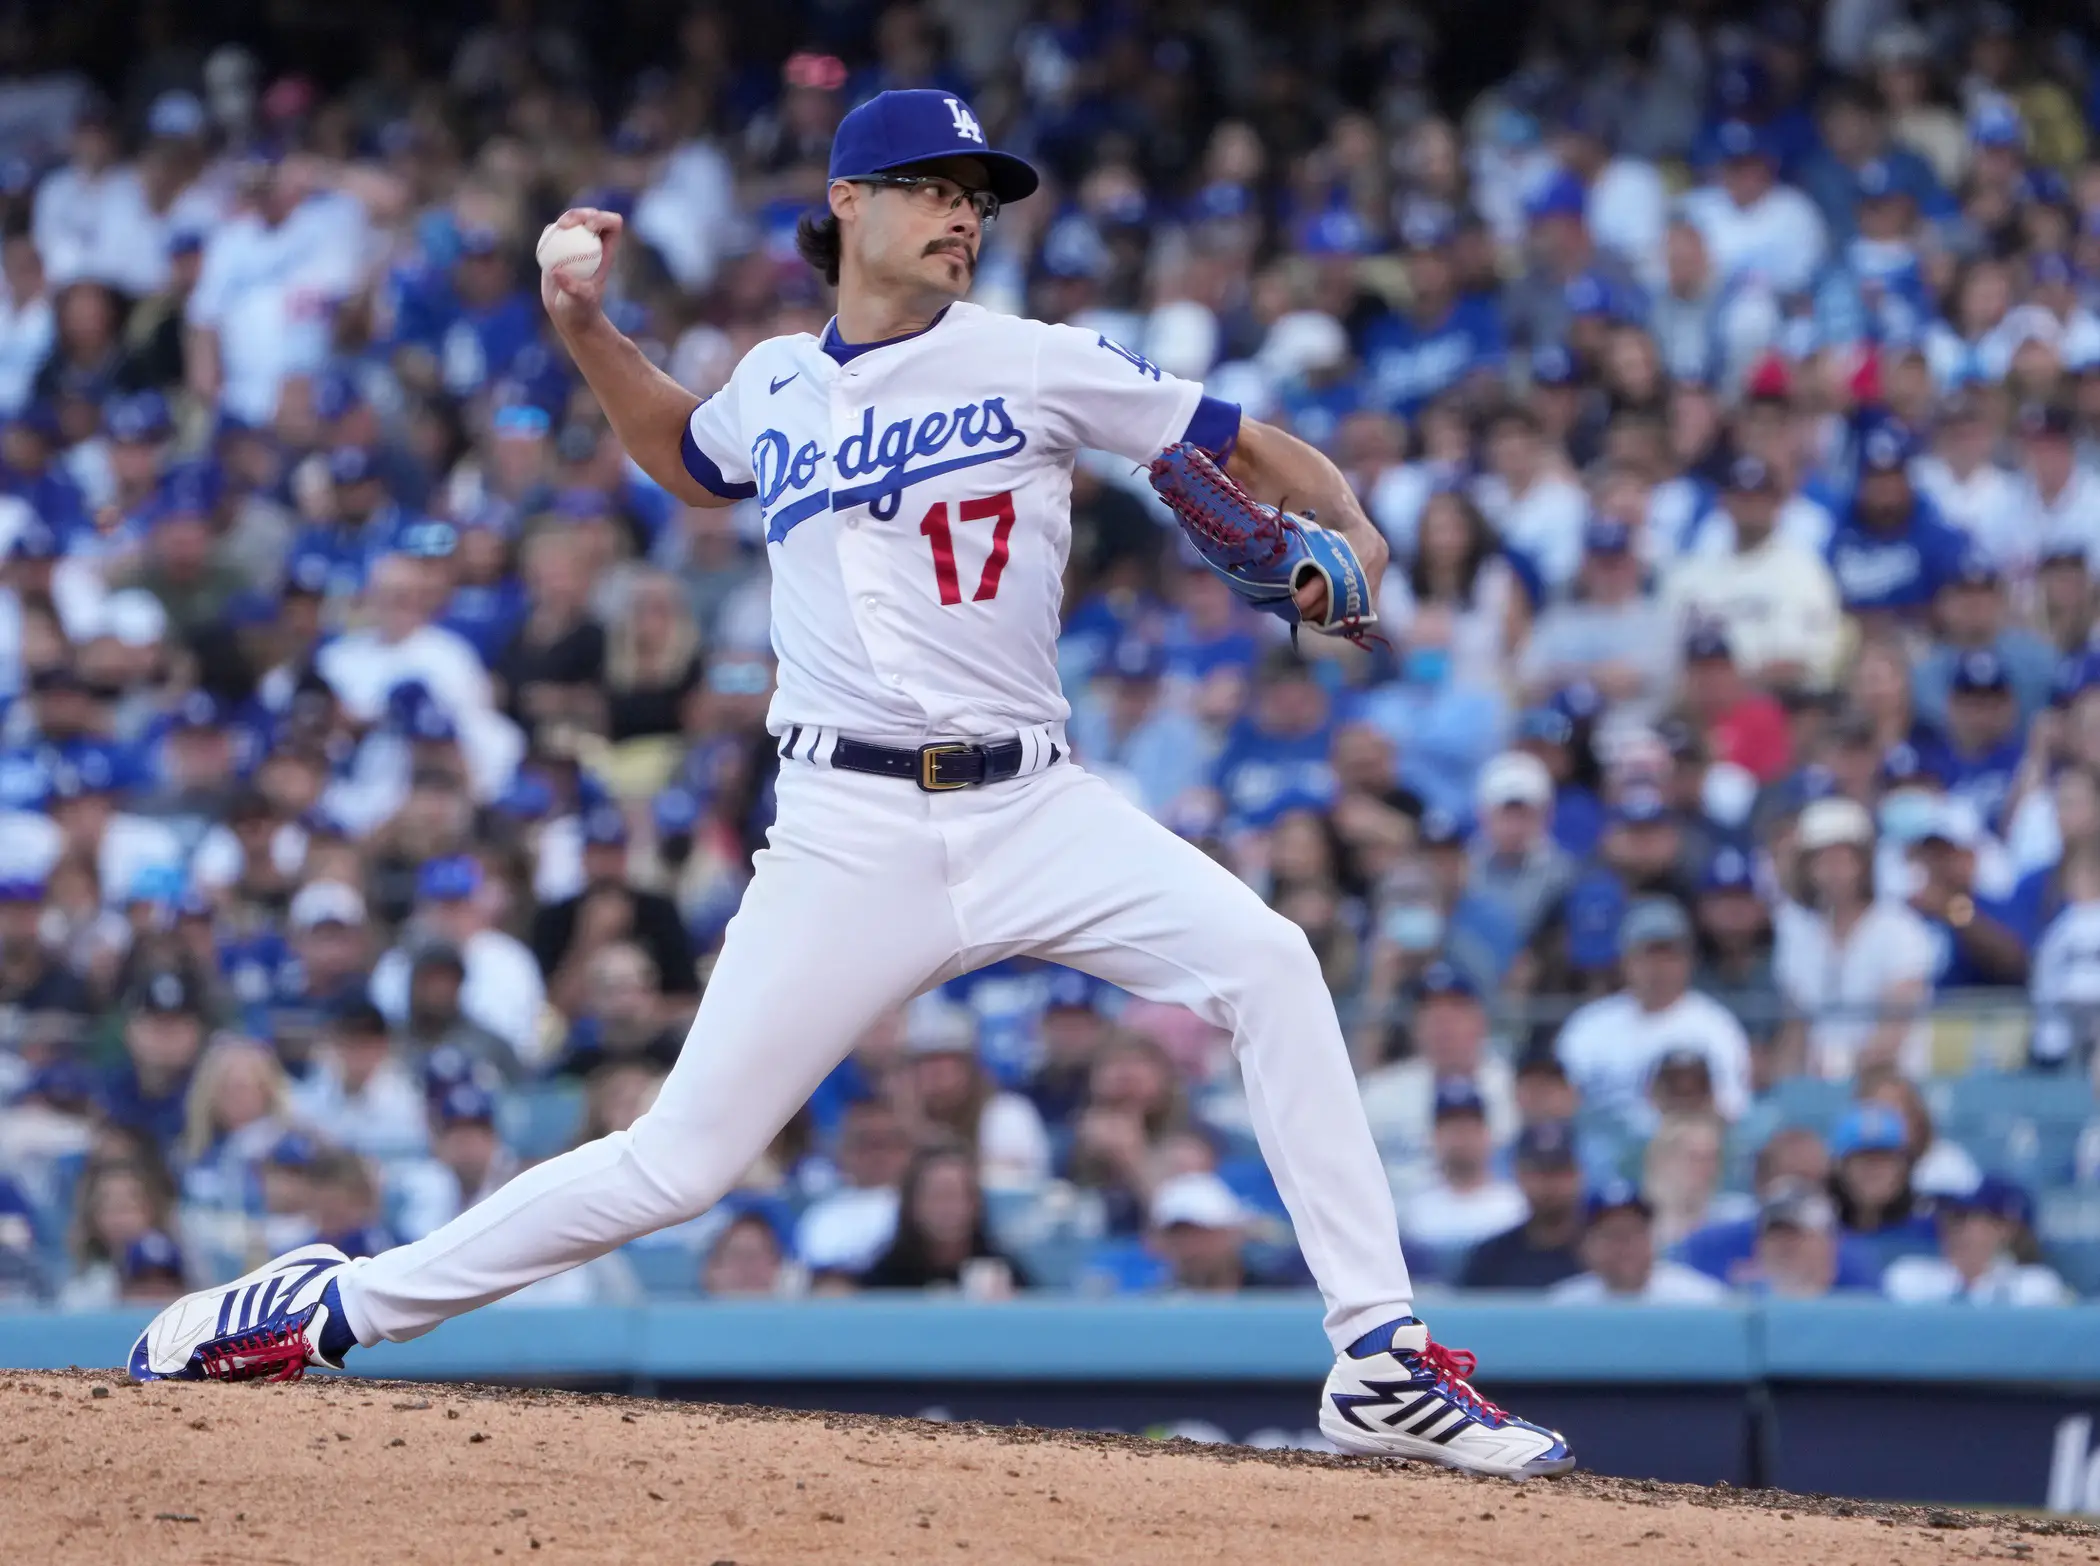 Dodgers Injury News: Joe Kelly On the Mend After Bullpen Session in LA